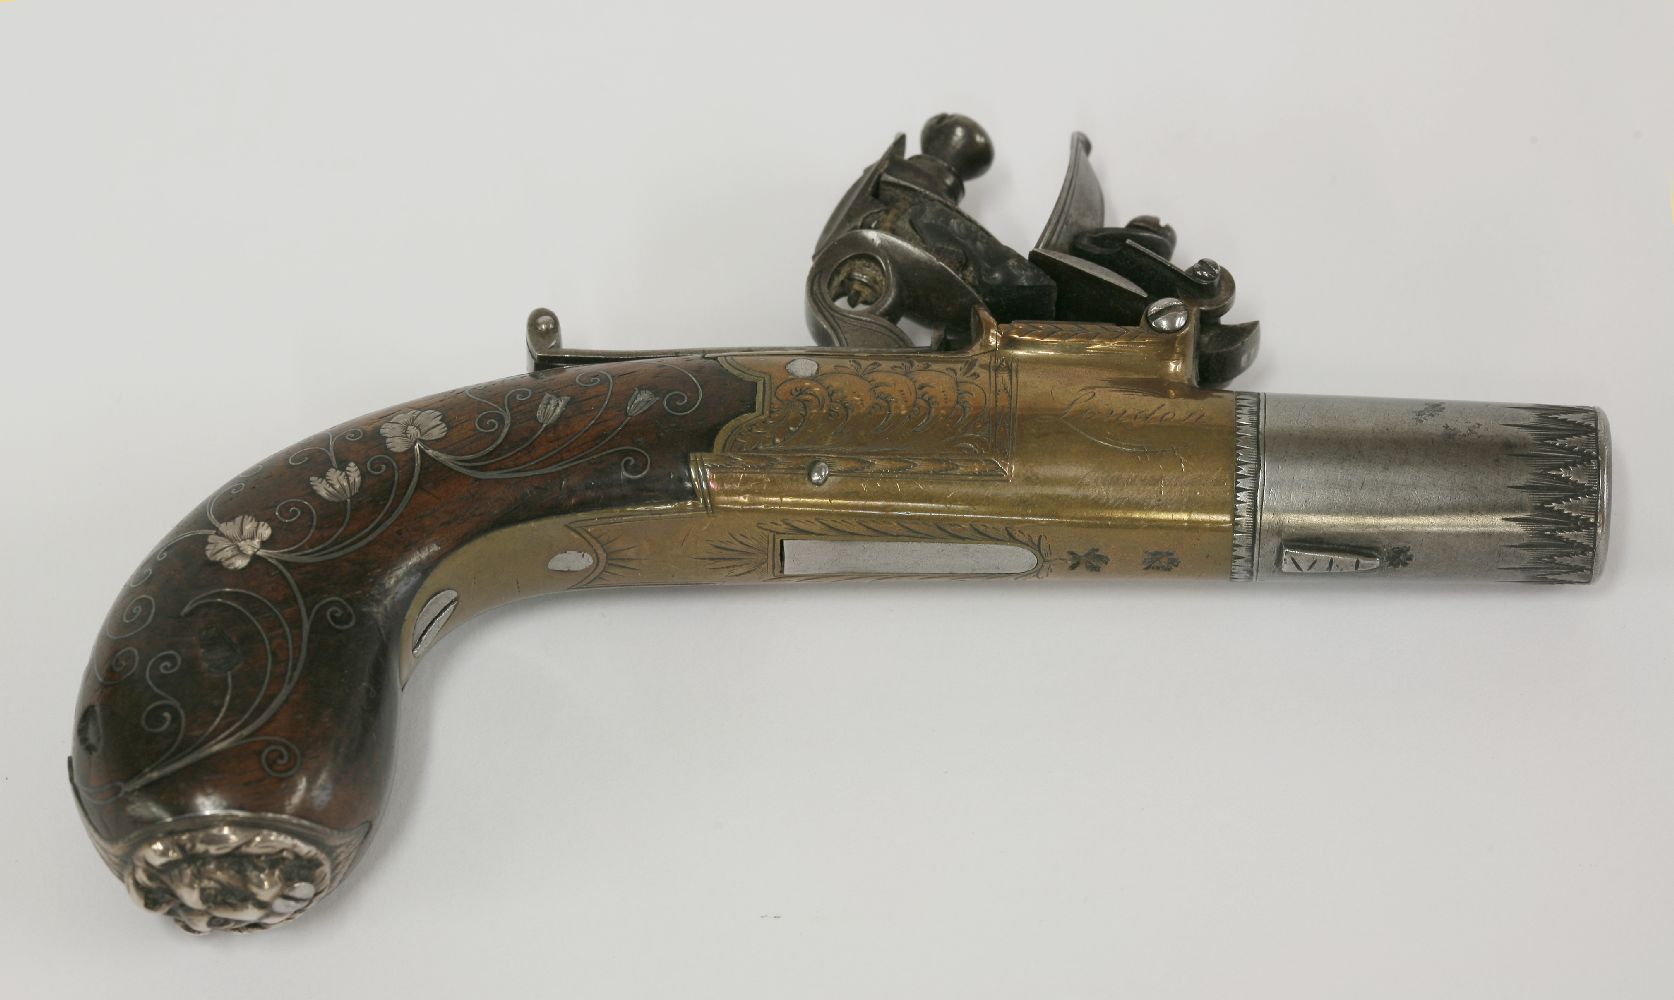 A flintlock pocket pistol, c.1800, by Smith, London, with turn-off barrel and brass stock, - Image 2 of 4